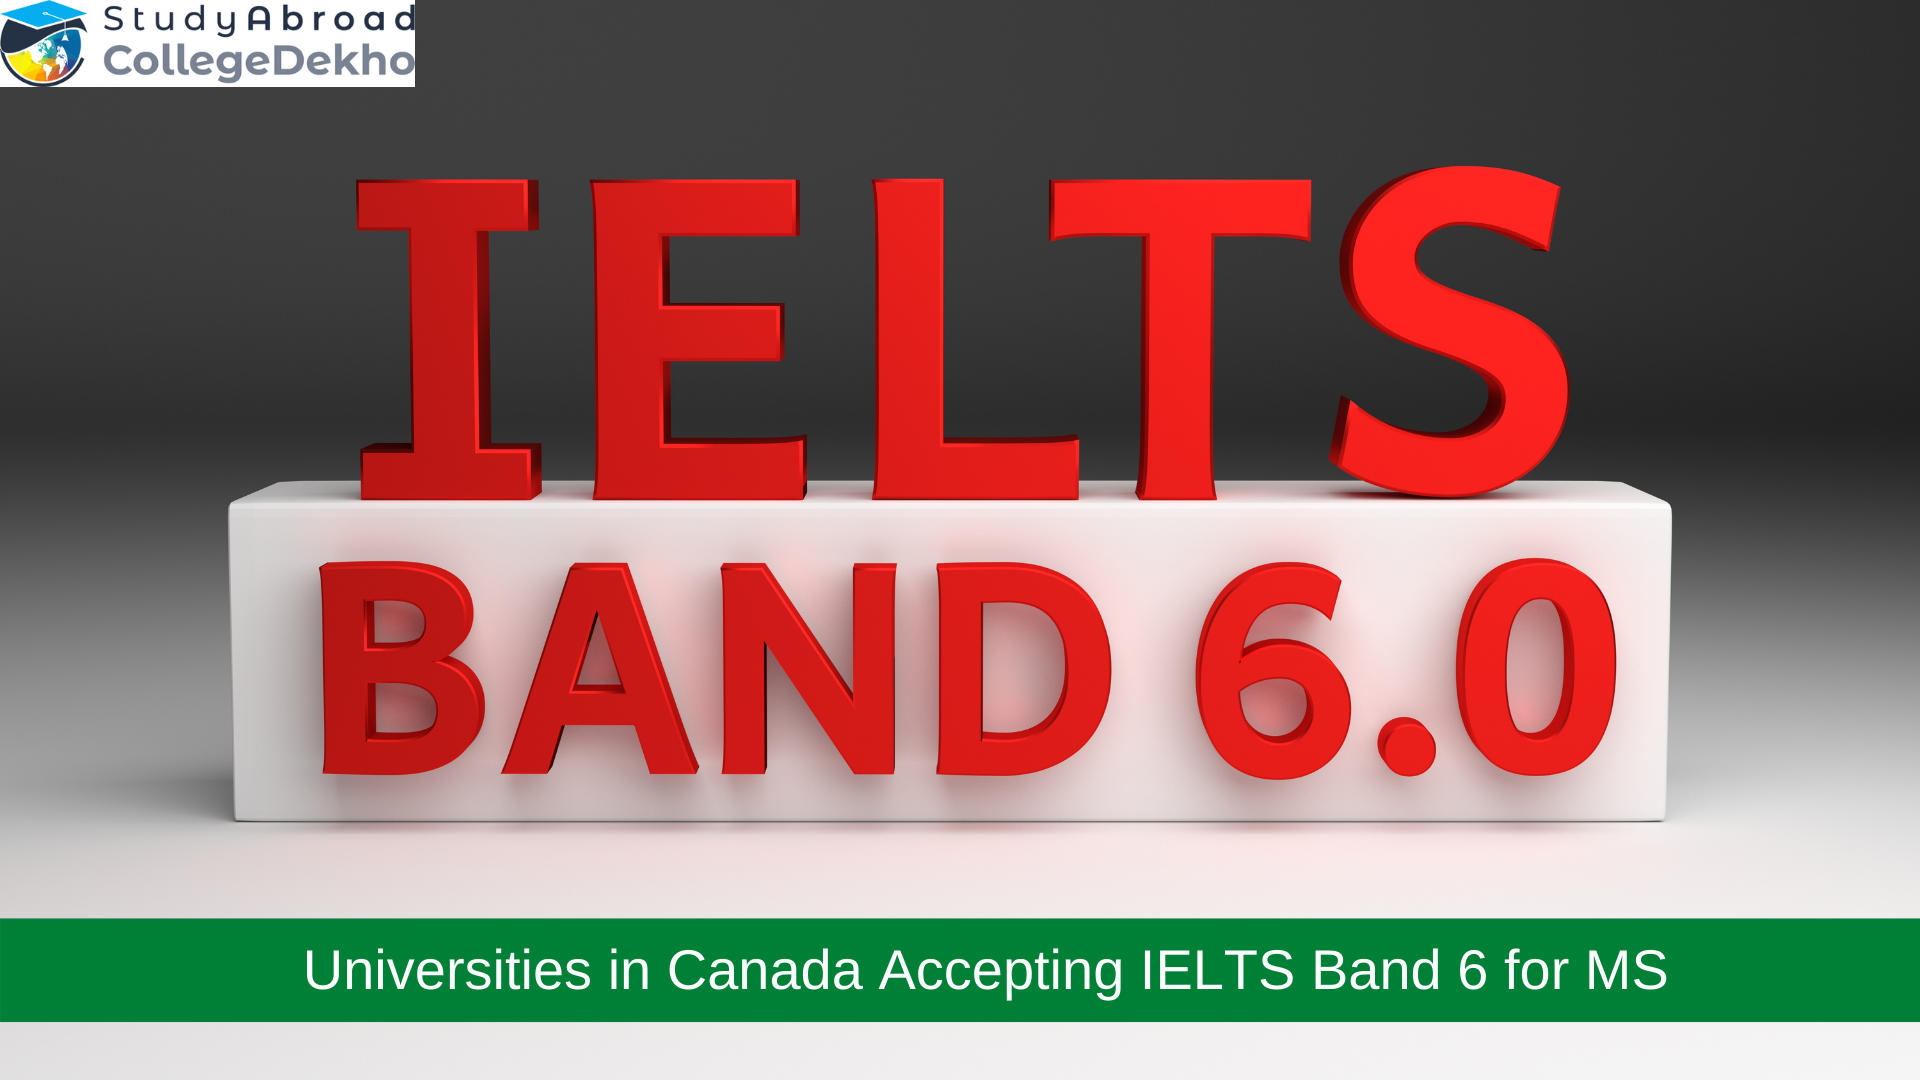 Universities in Canada Accepting IELTS Band 6 for Masters (MS)